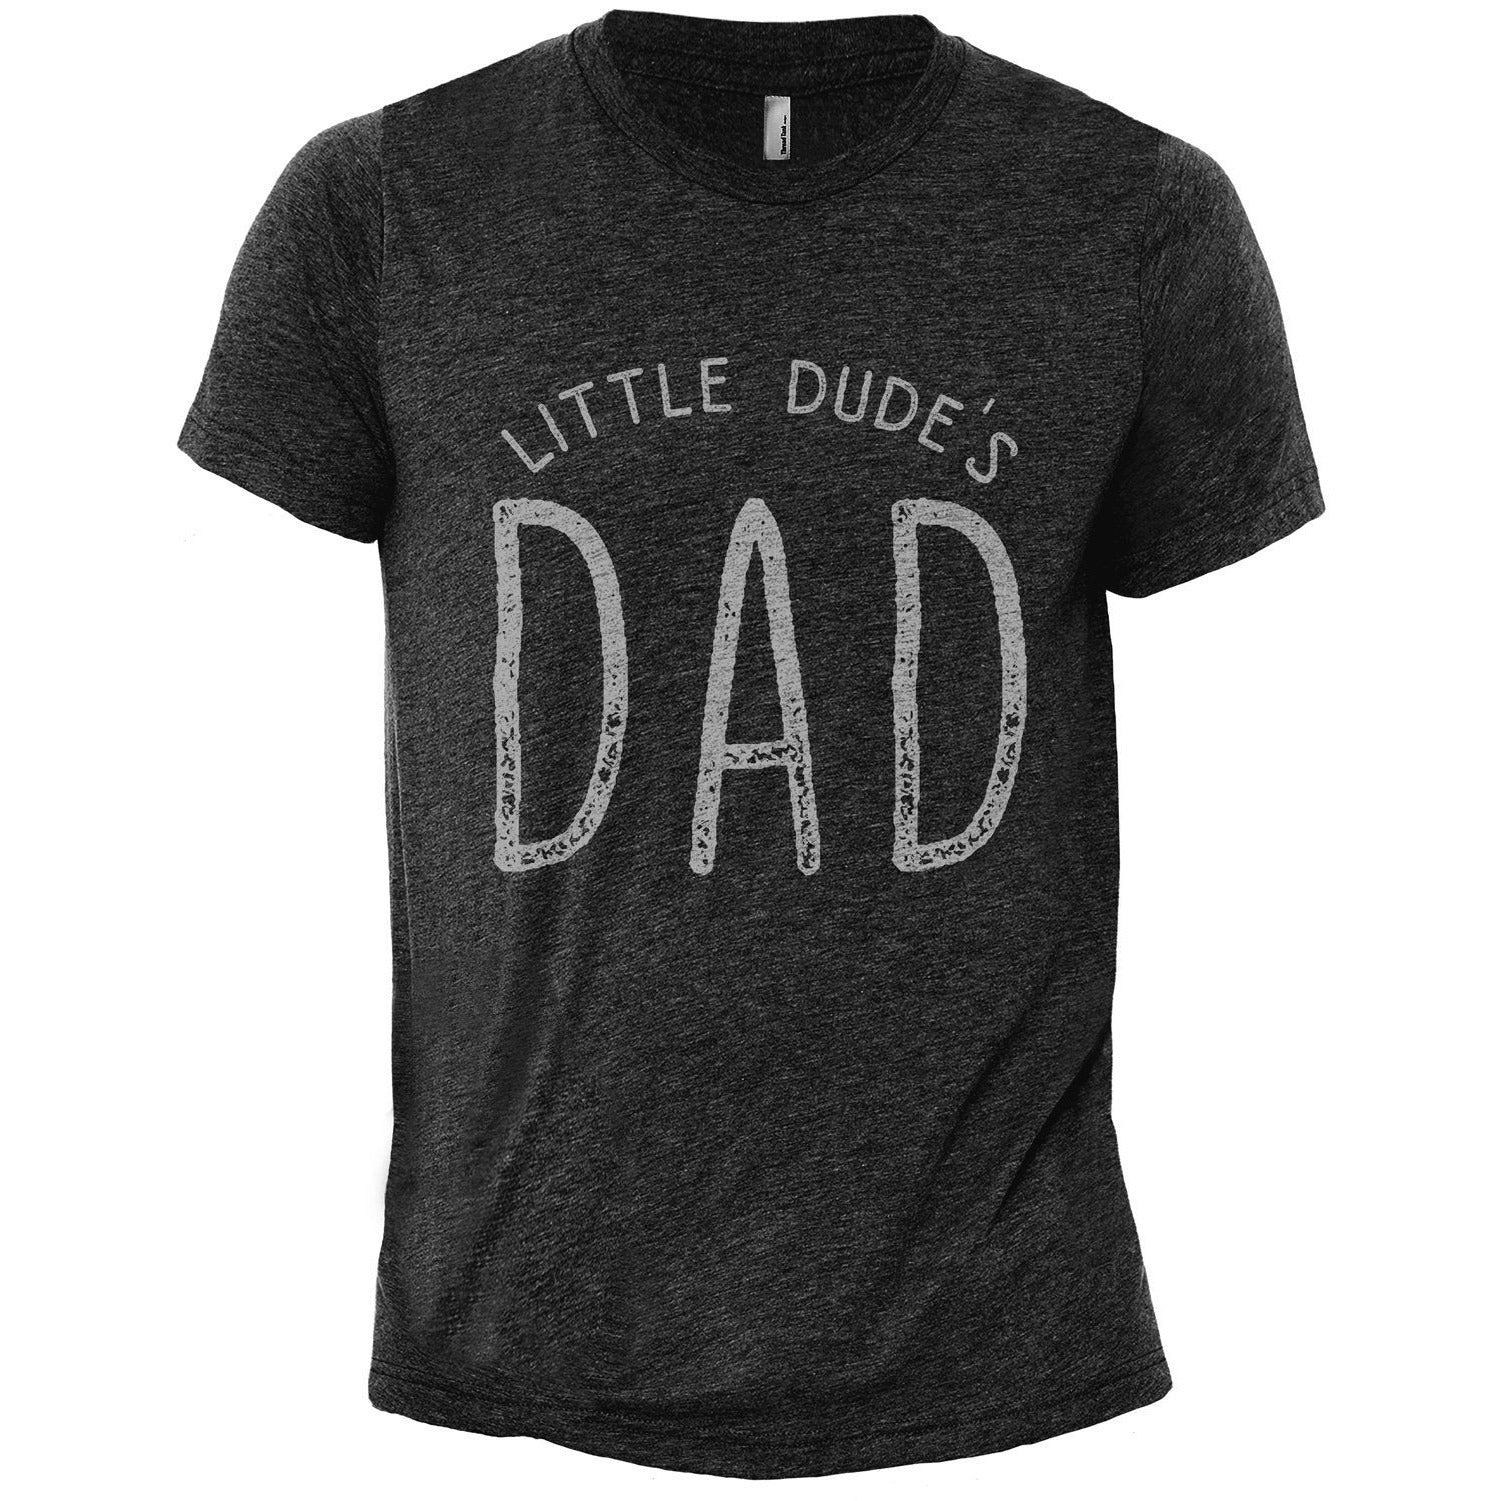 Lil Dude's Dad Charcoal Printed Graphic Men's Crew T-Shirt Tee